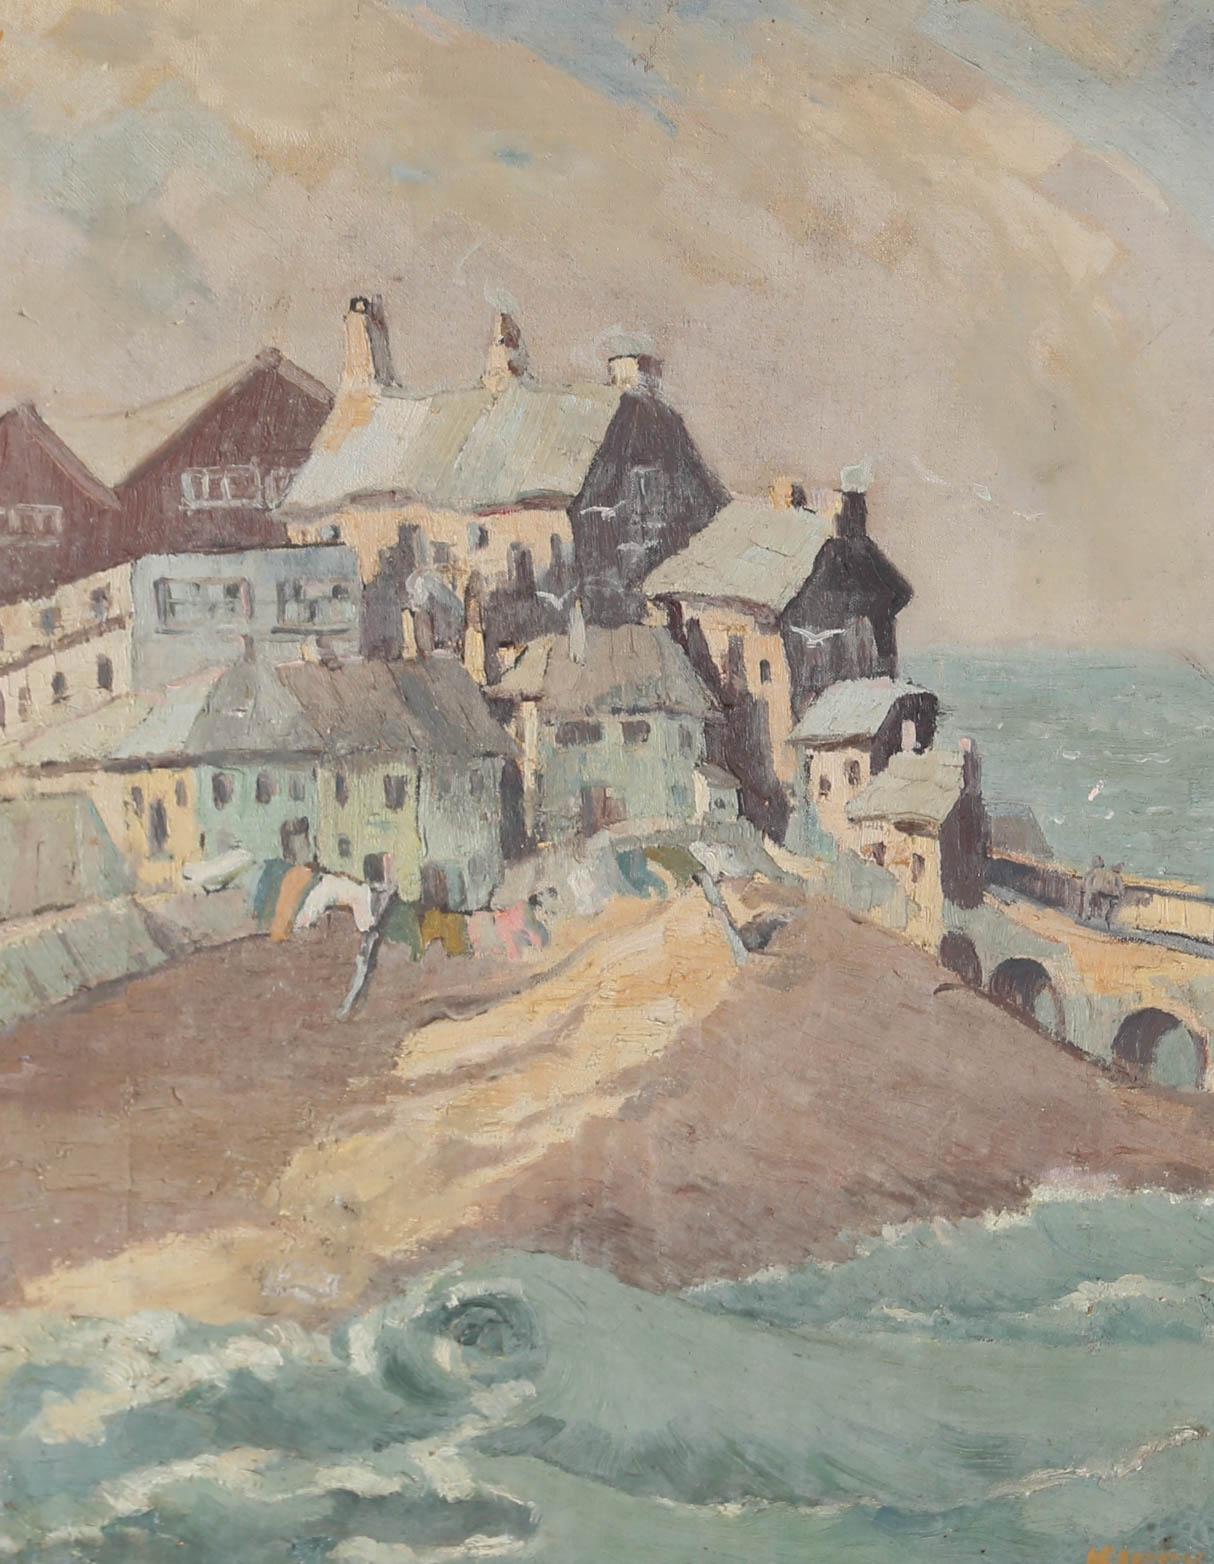 This charming Mid-Century scene depicts a coastal town on a stormy day. Washing lines shake in the wind and waves crash against the beach as a storm swirls overhead. Signed to the lower right. On canvas.
